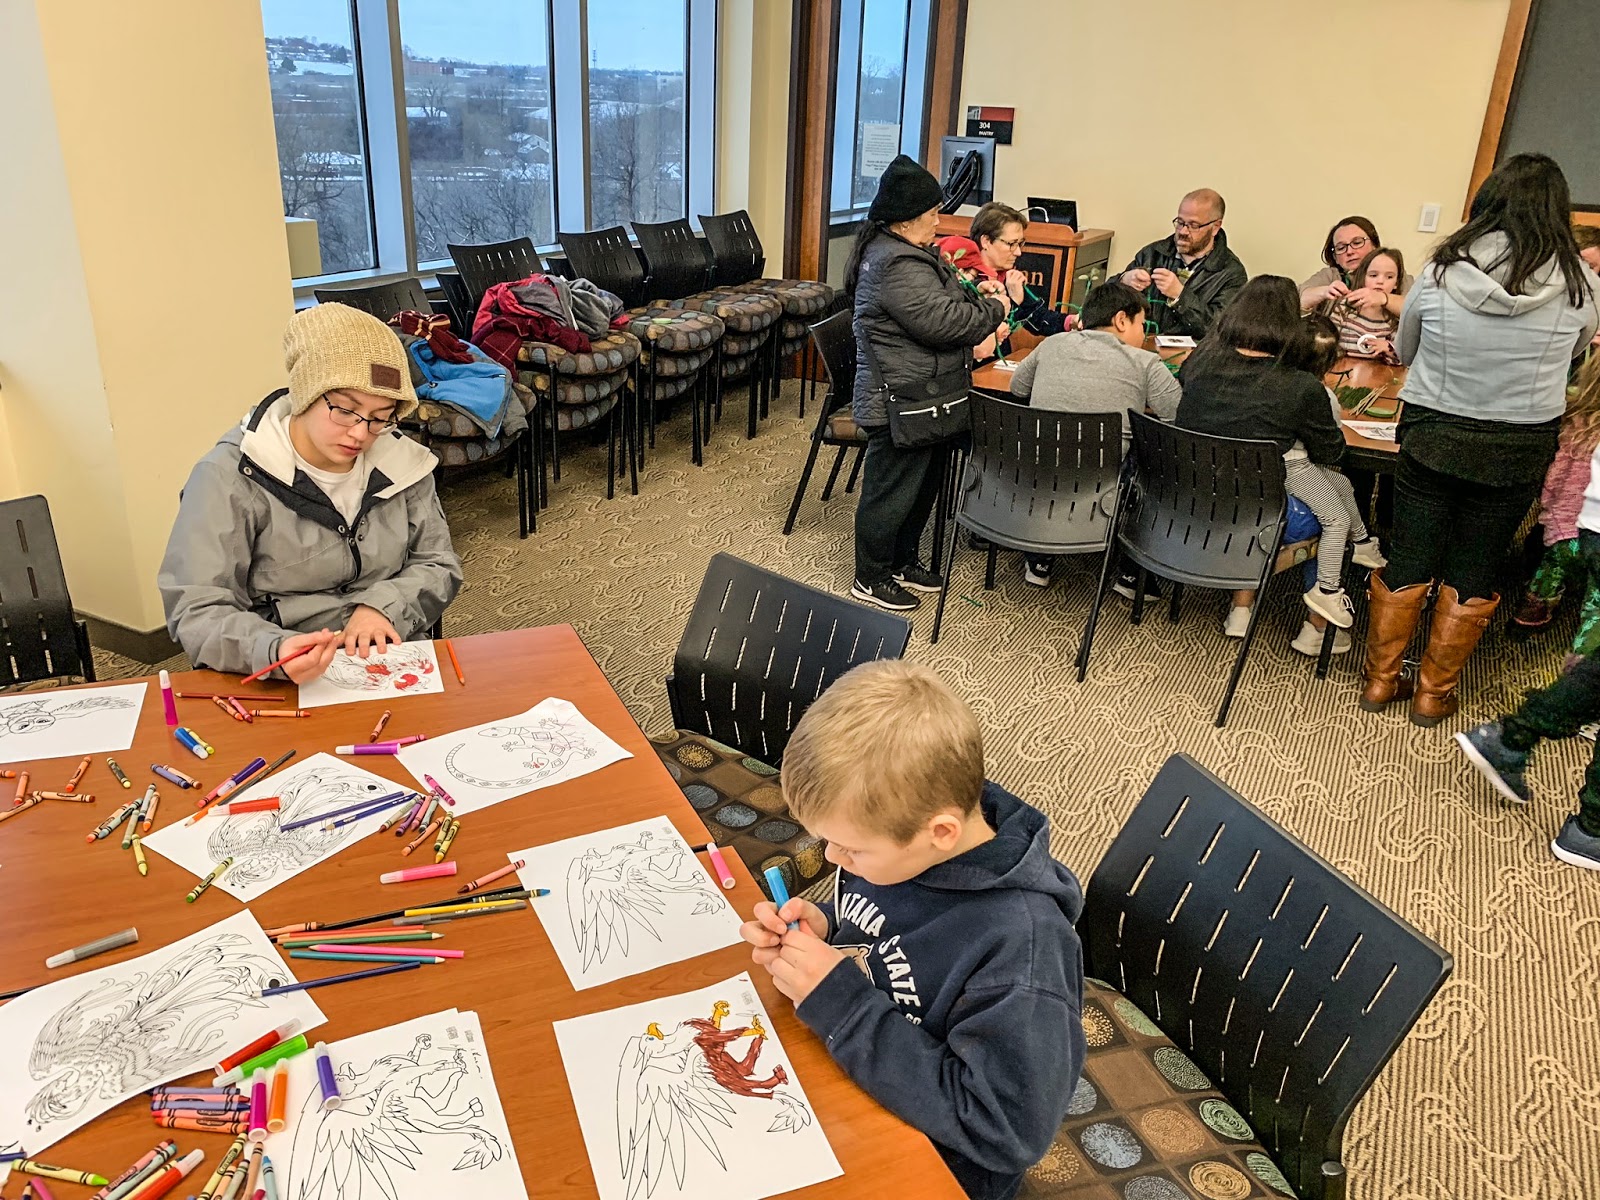 Participants color magical beasts, foreground, while others construct bowtruckles from green pipe cleaners at “Beastly Reads,” a Harry Potter-themed event at the Metropolitan State University Library and Learning Center on Saturday, Dec. 1, 2018. (Photo by J.D. Ganfield / The Metropolitan)